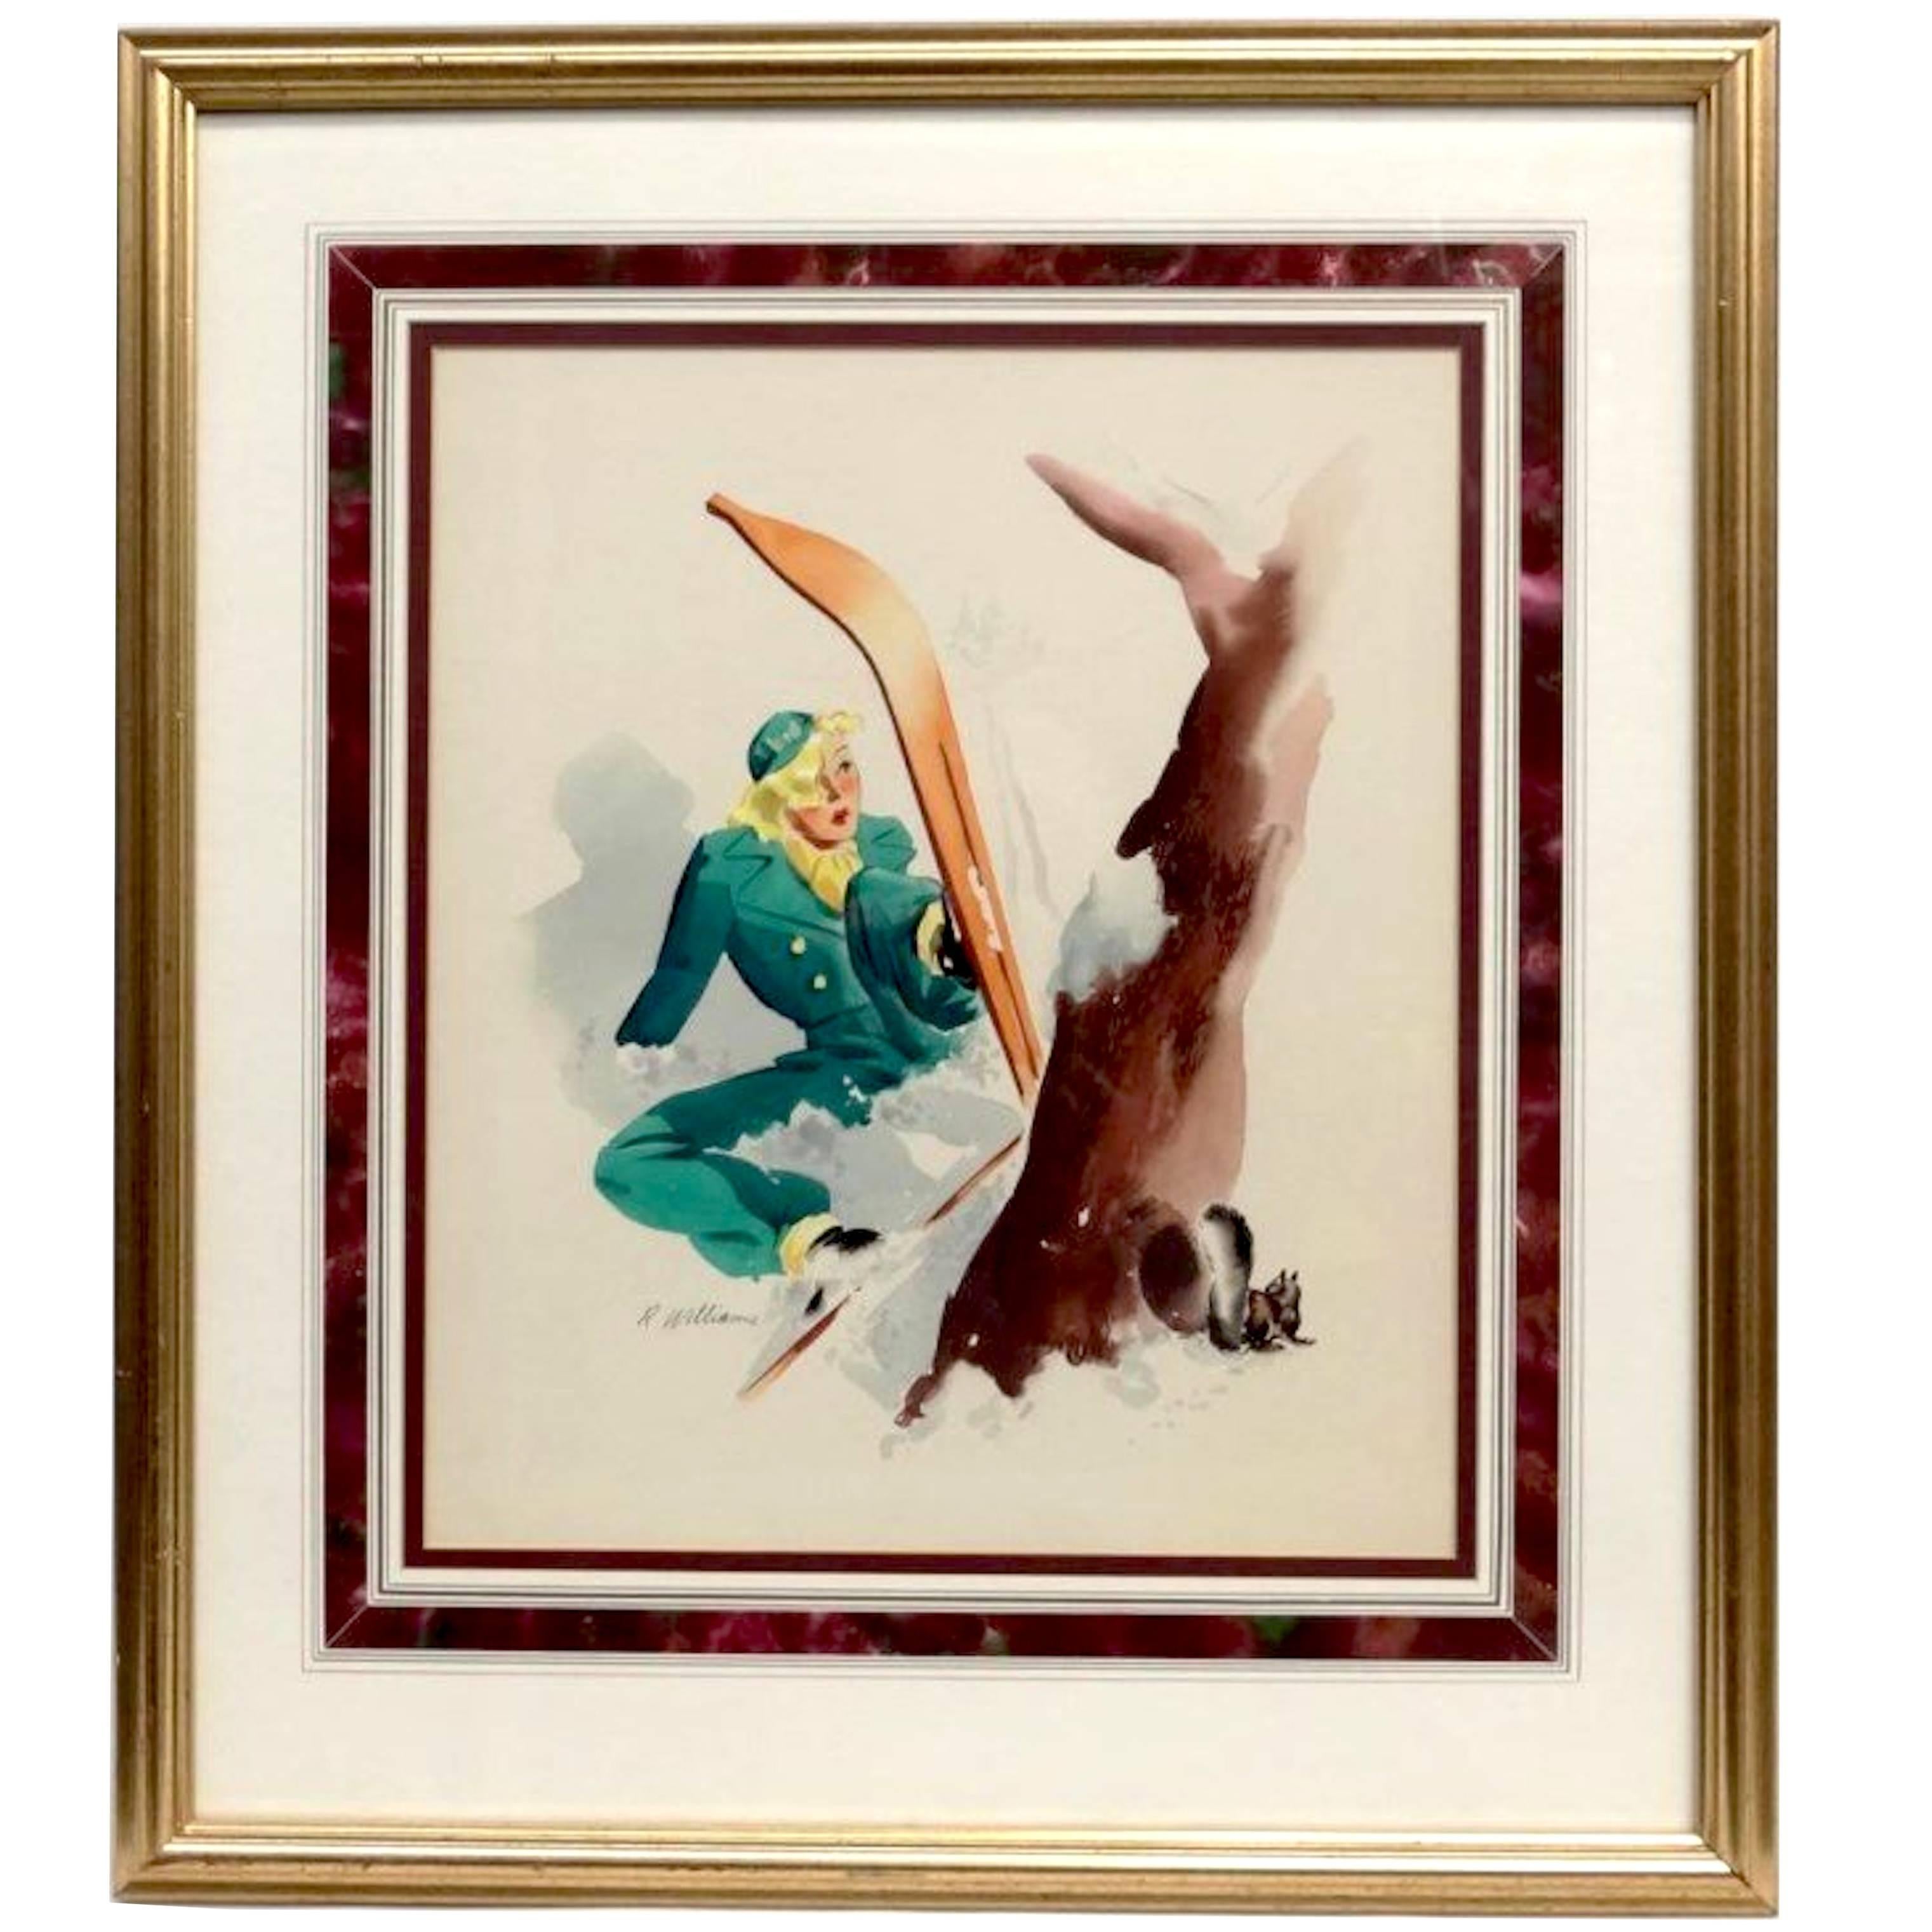 "Ski Bunny" 1950s Illustration Watercolor and Guache Framed